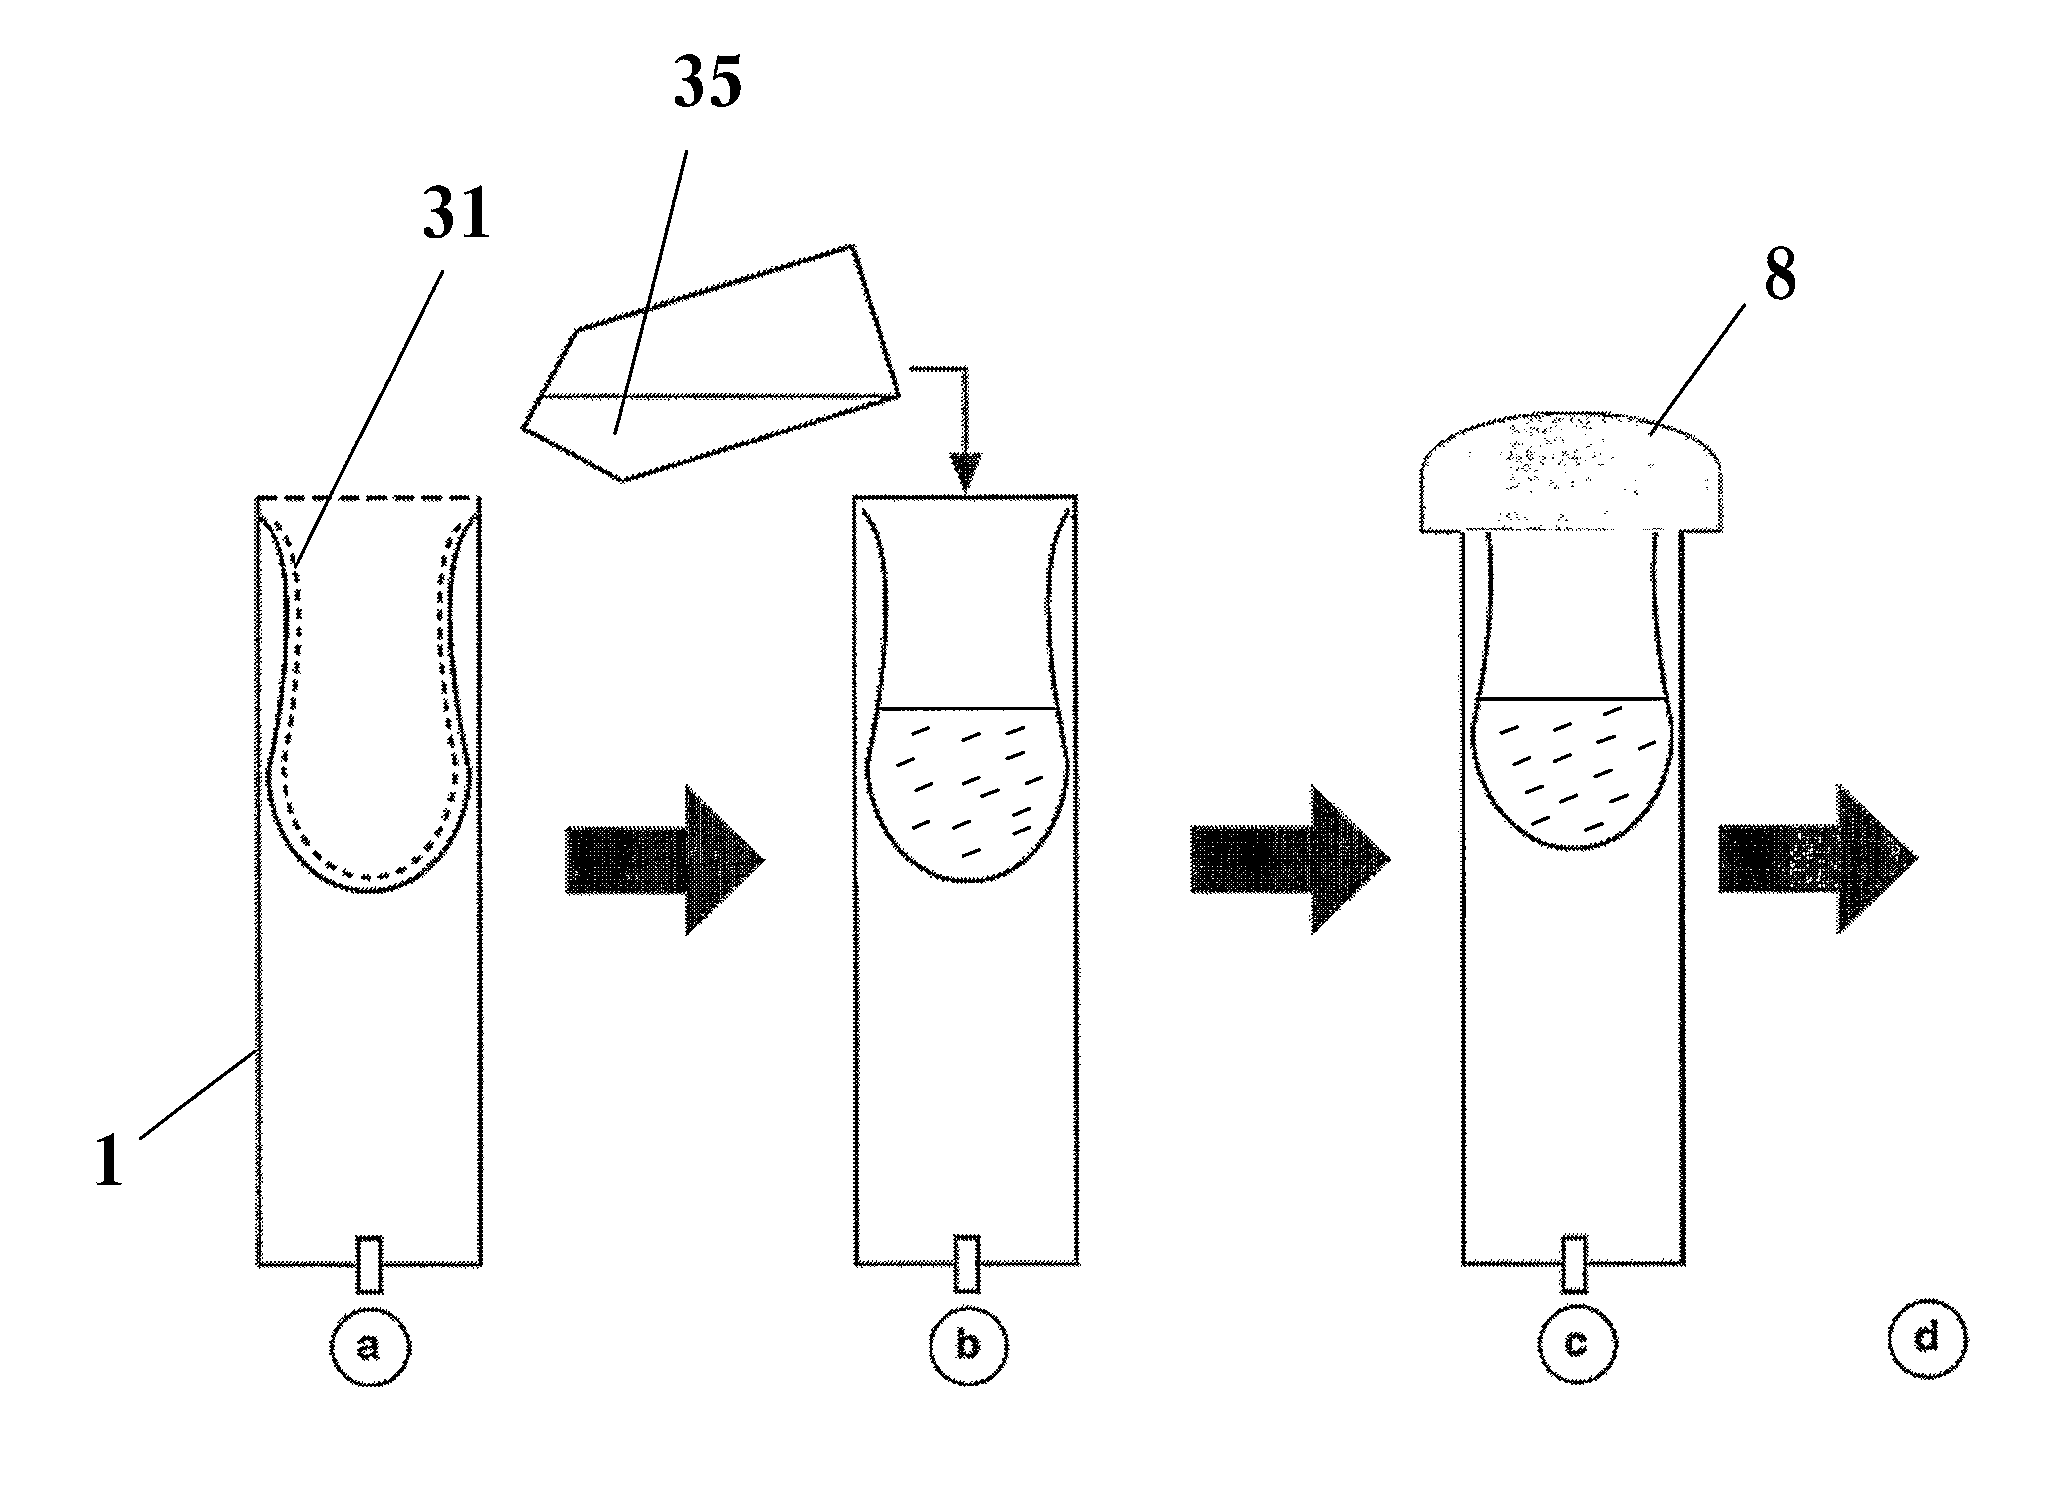 Colorectal cell sampling device